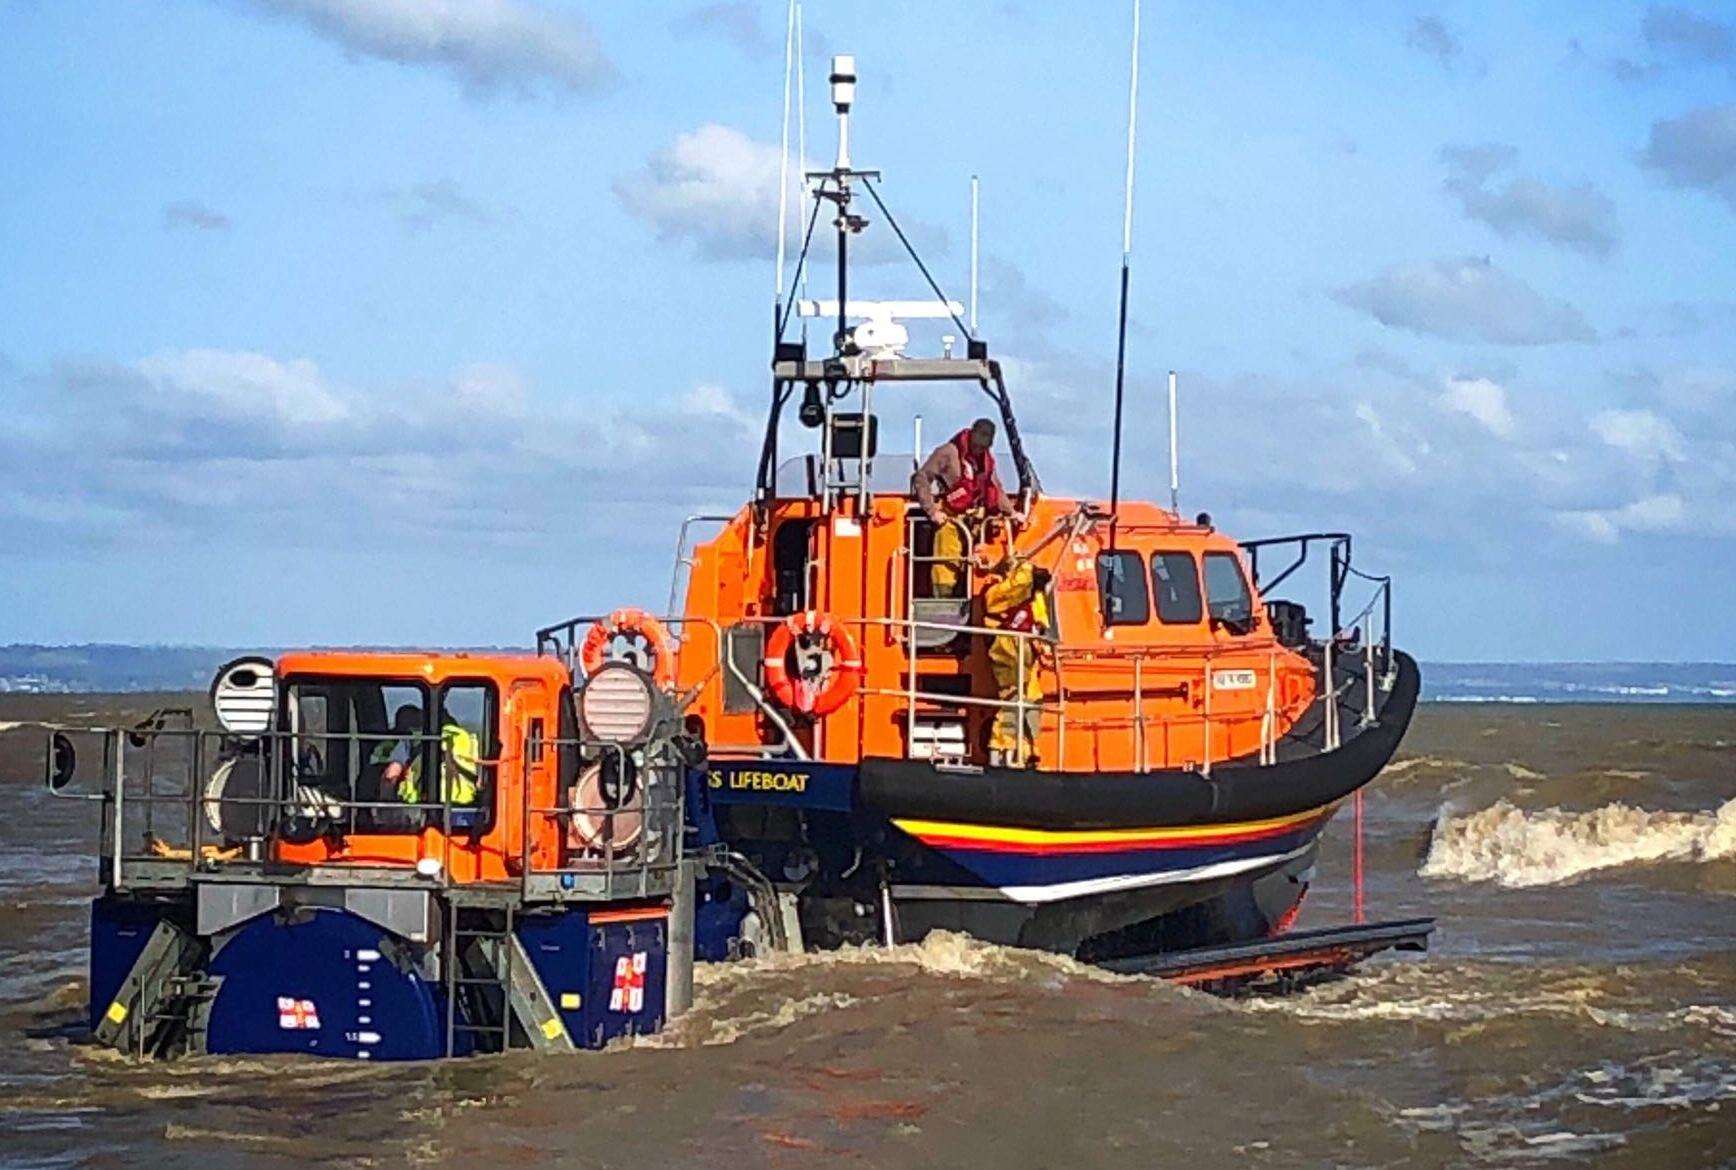 The Dungeness RNLI lifeboat on service launch. Credit: RNLI (4656625)